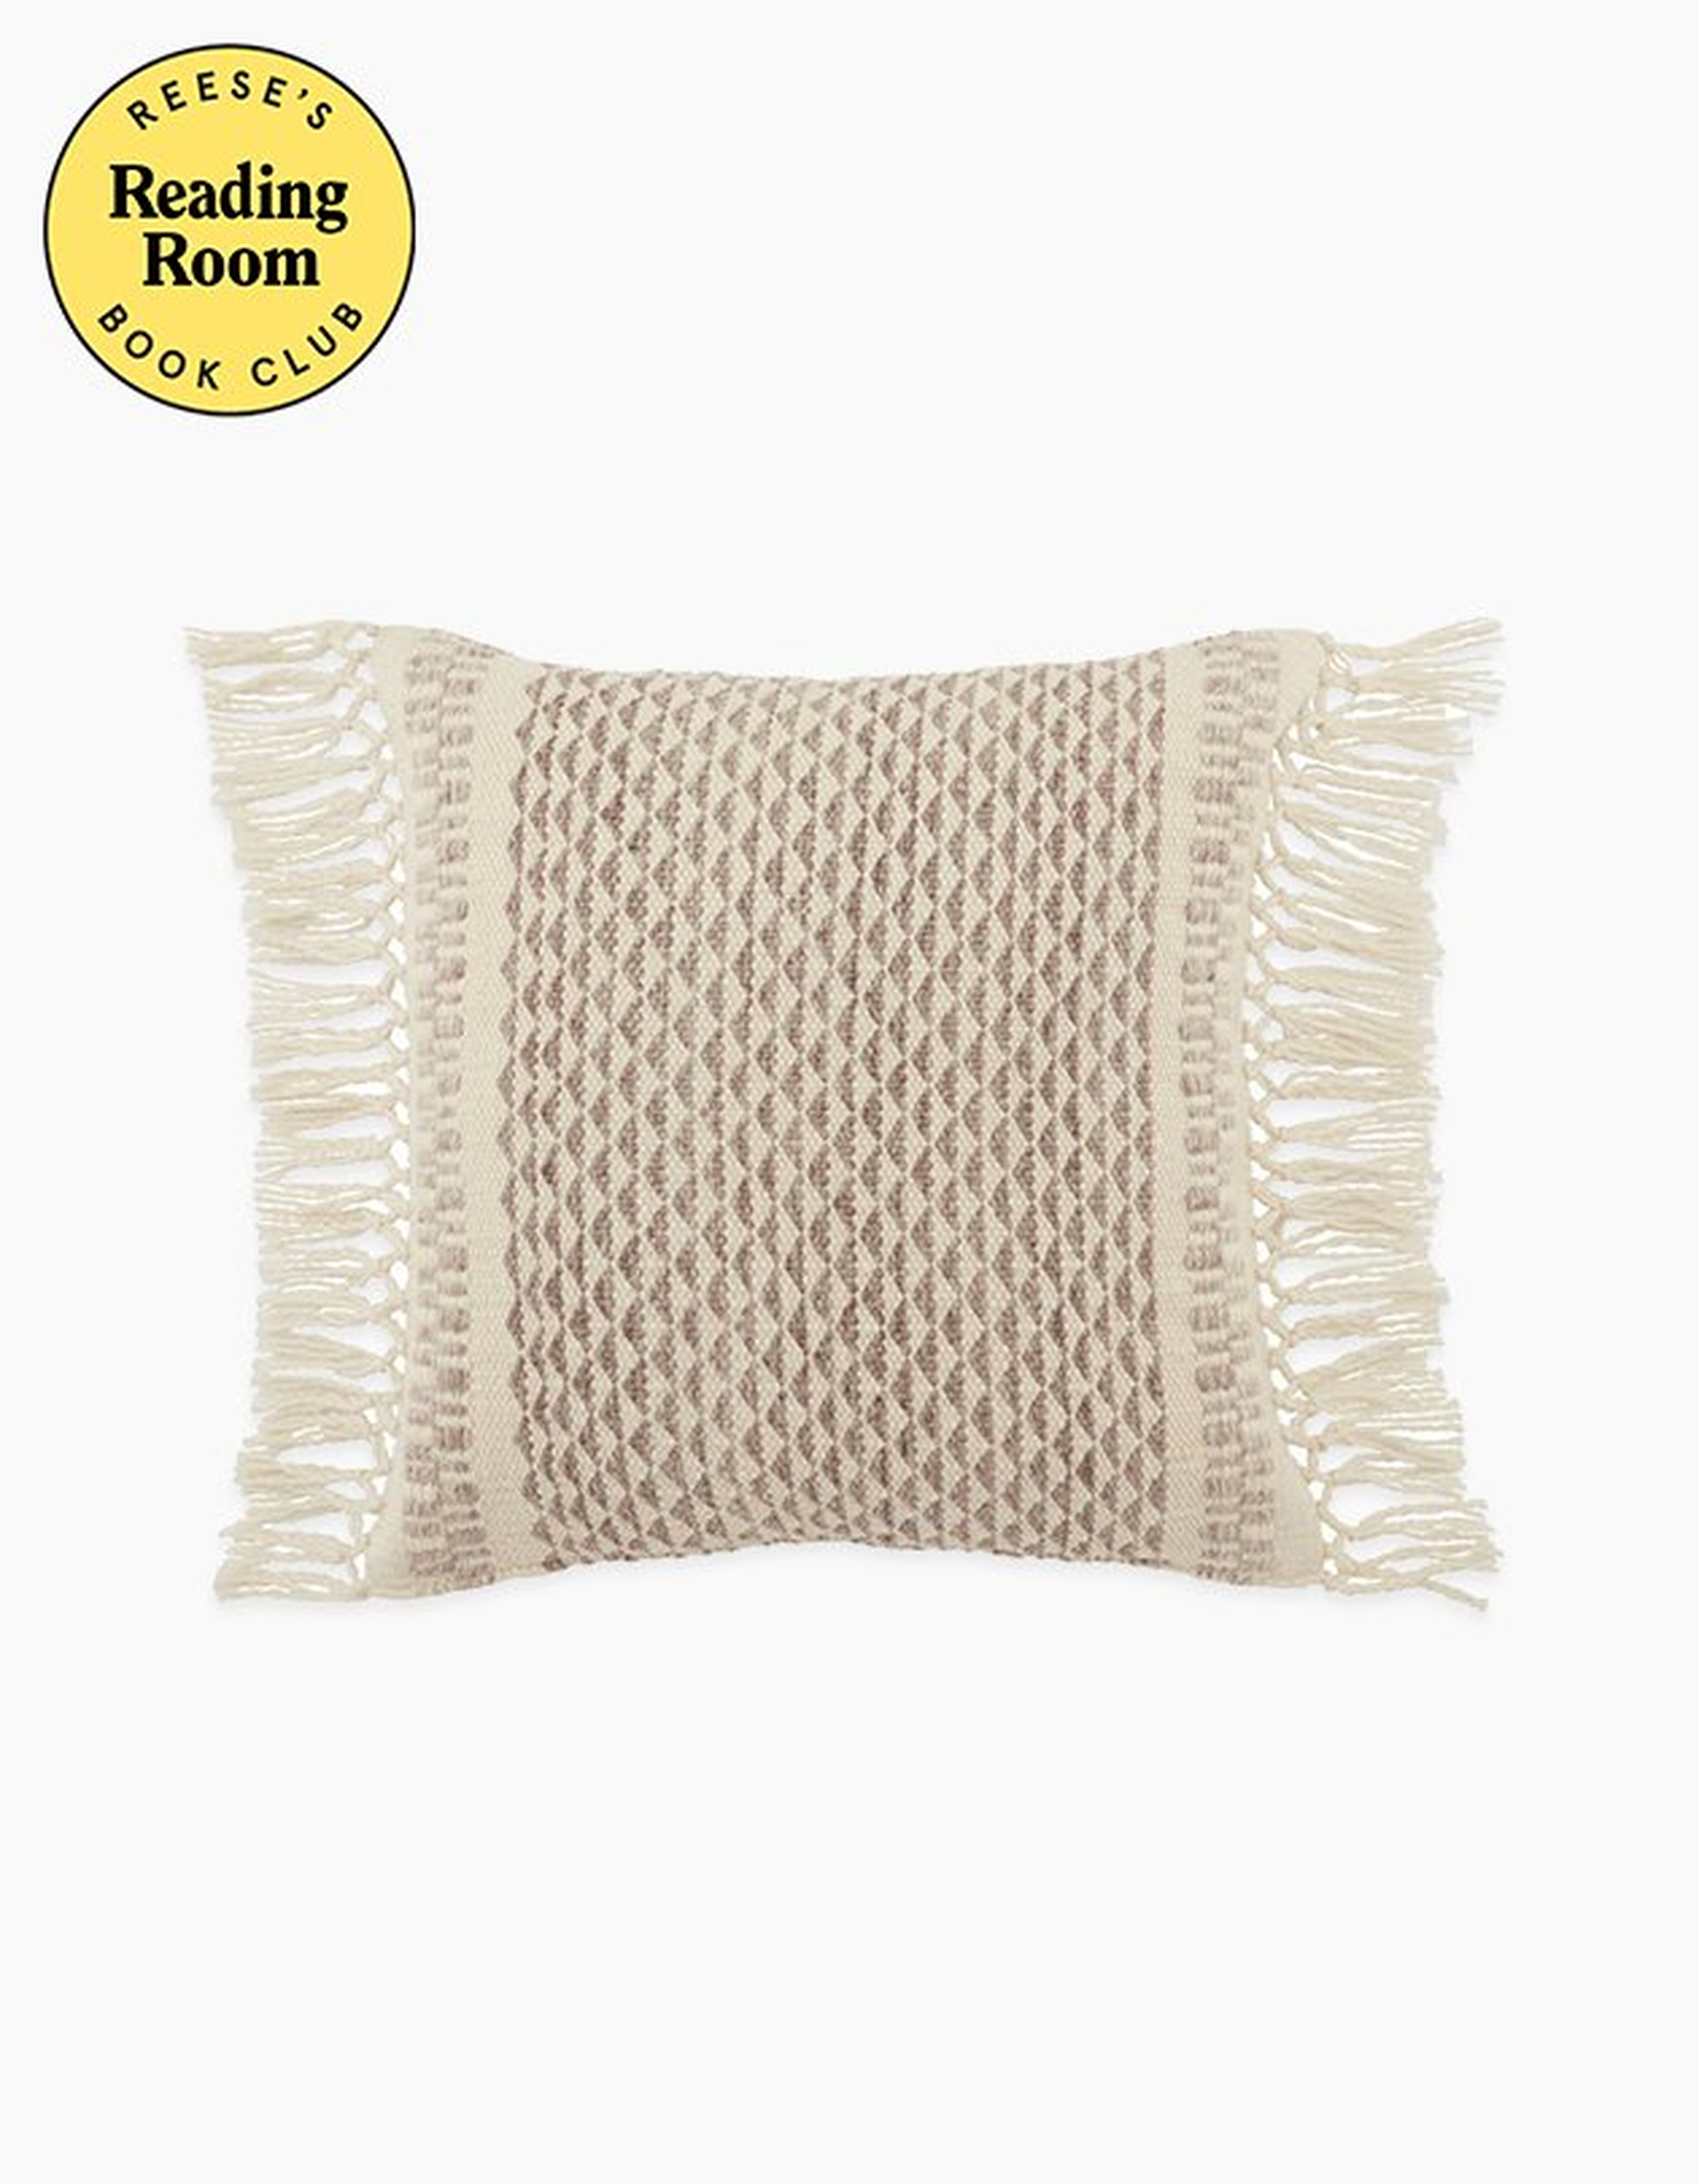 Fringe Pillow - Coffee 18" - Reese's Book Club x Havenly